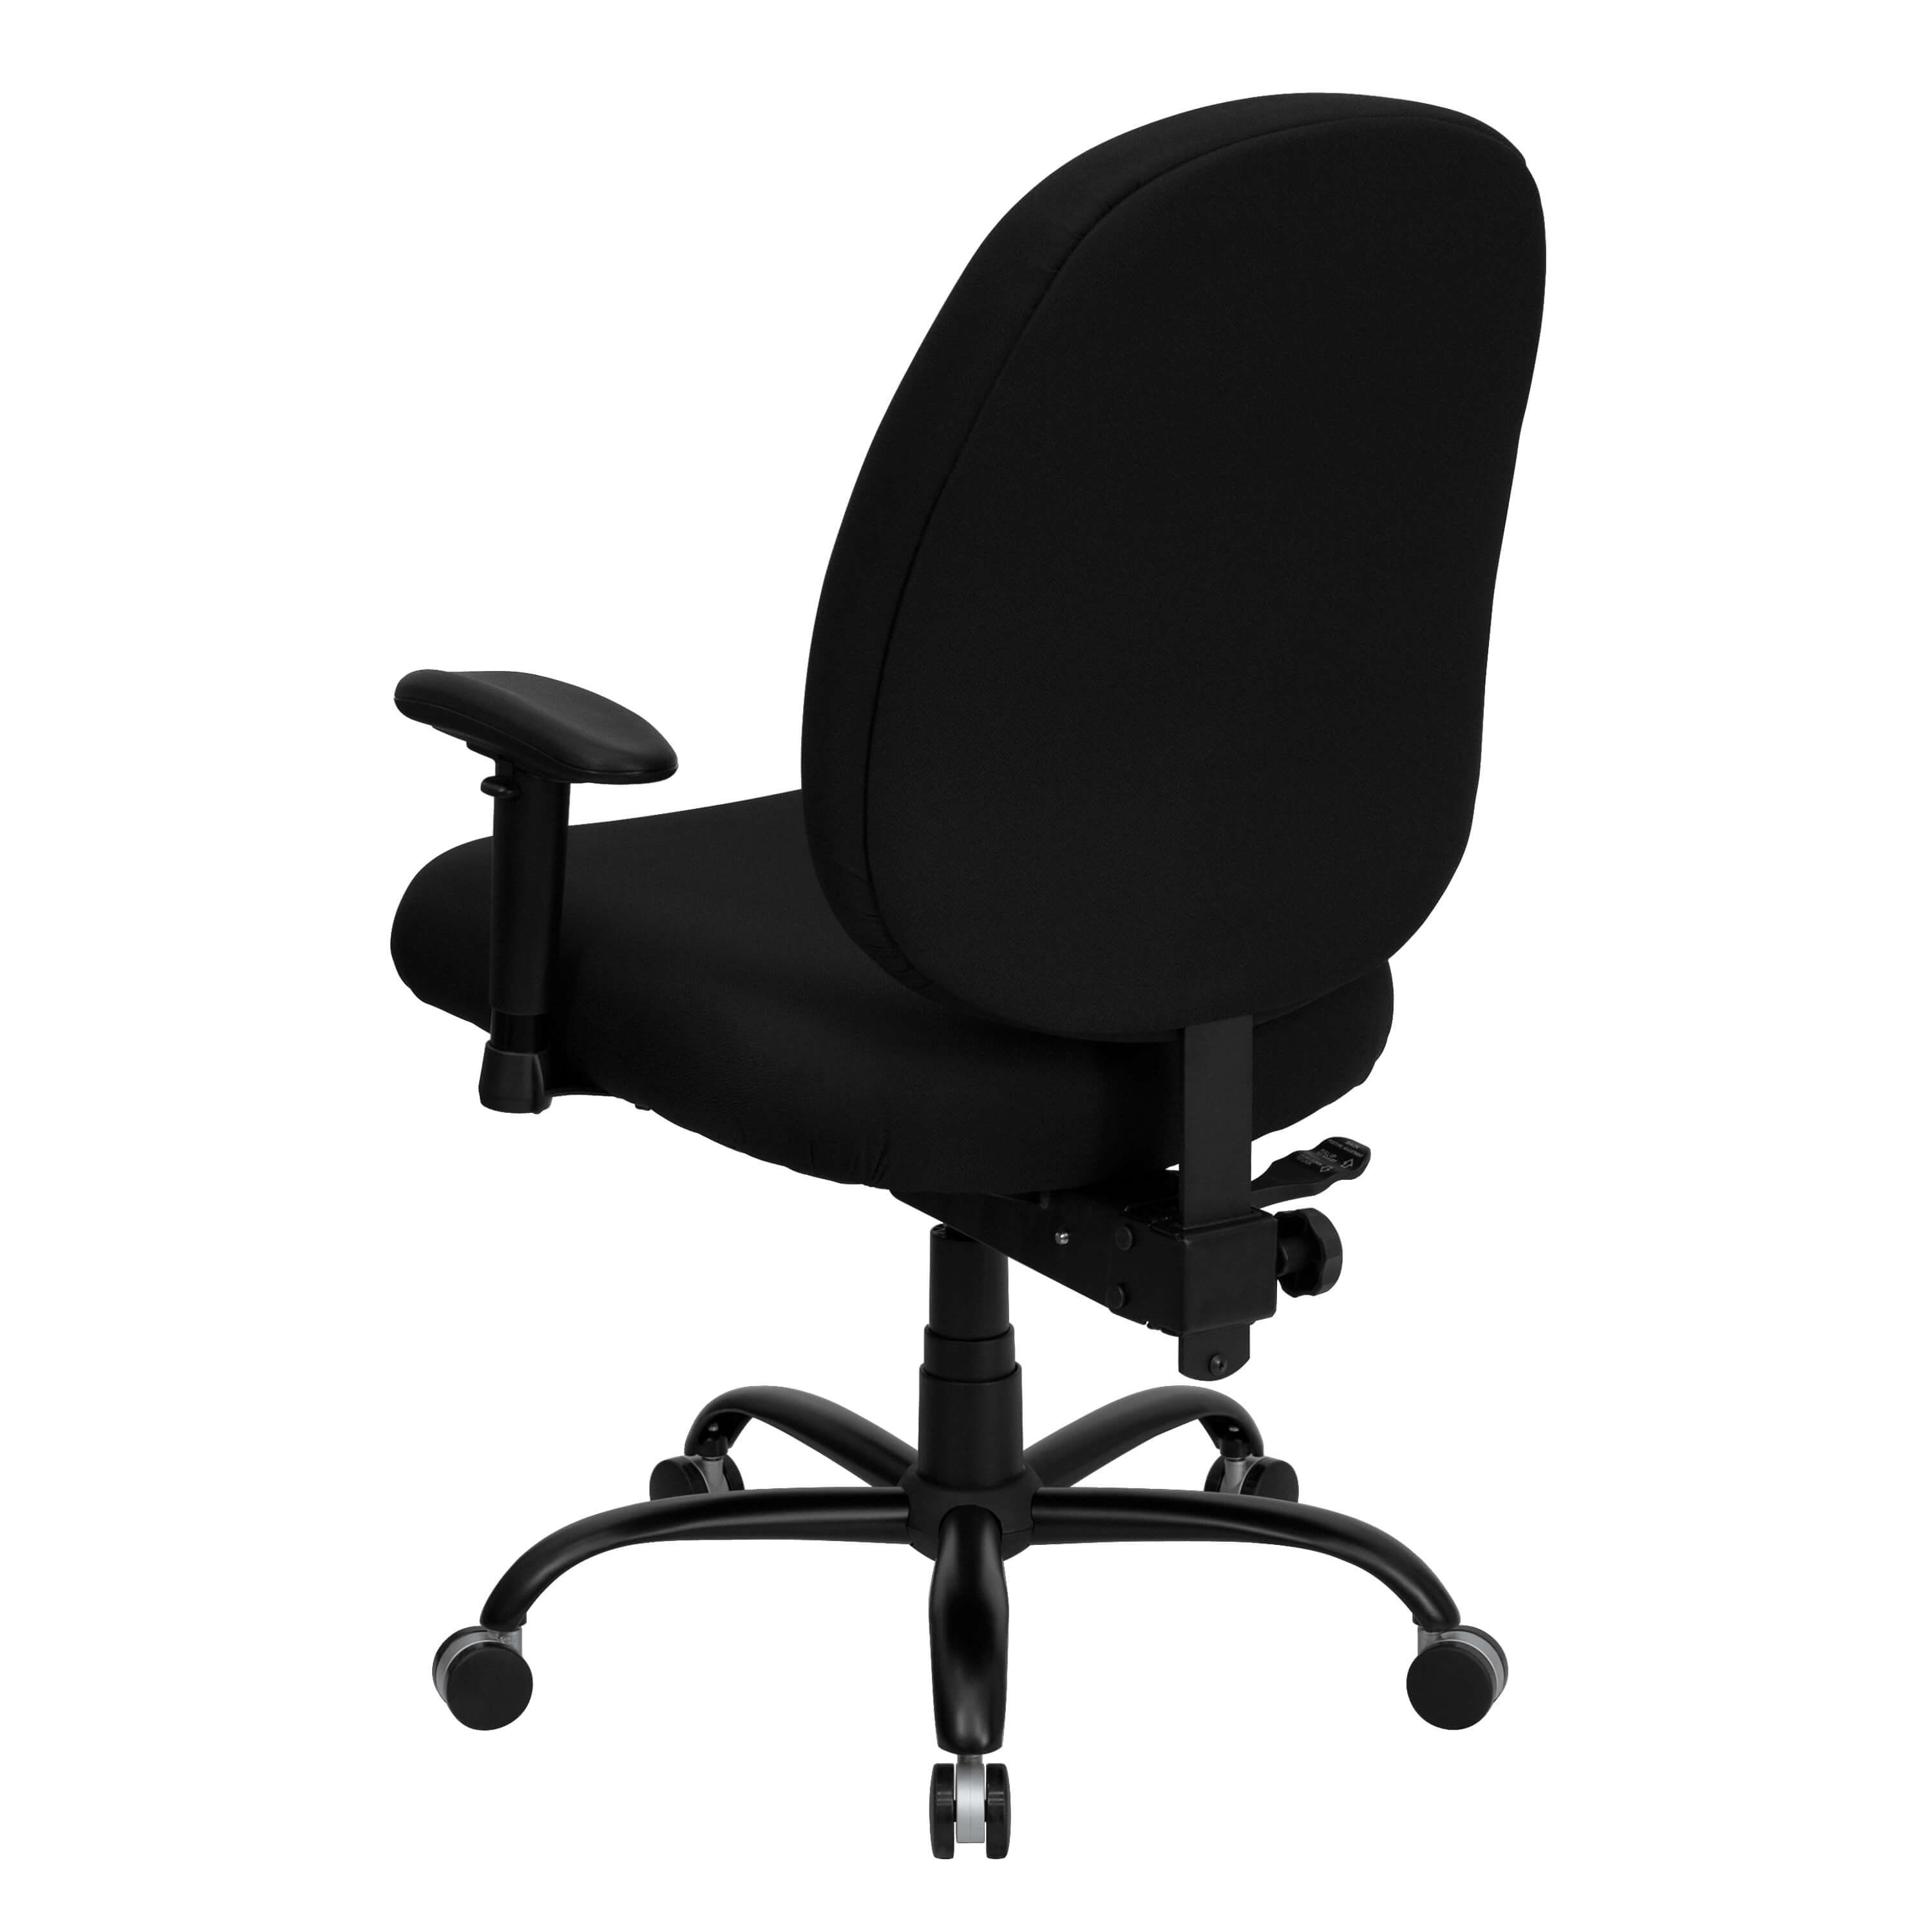 Office chair 400 lb weight capacity back view